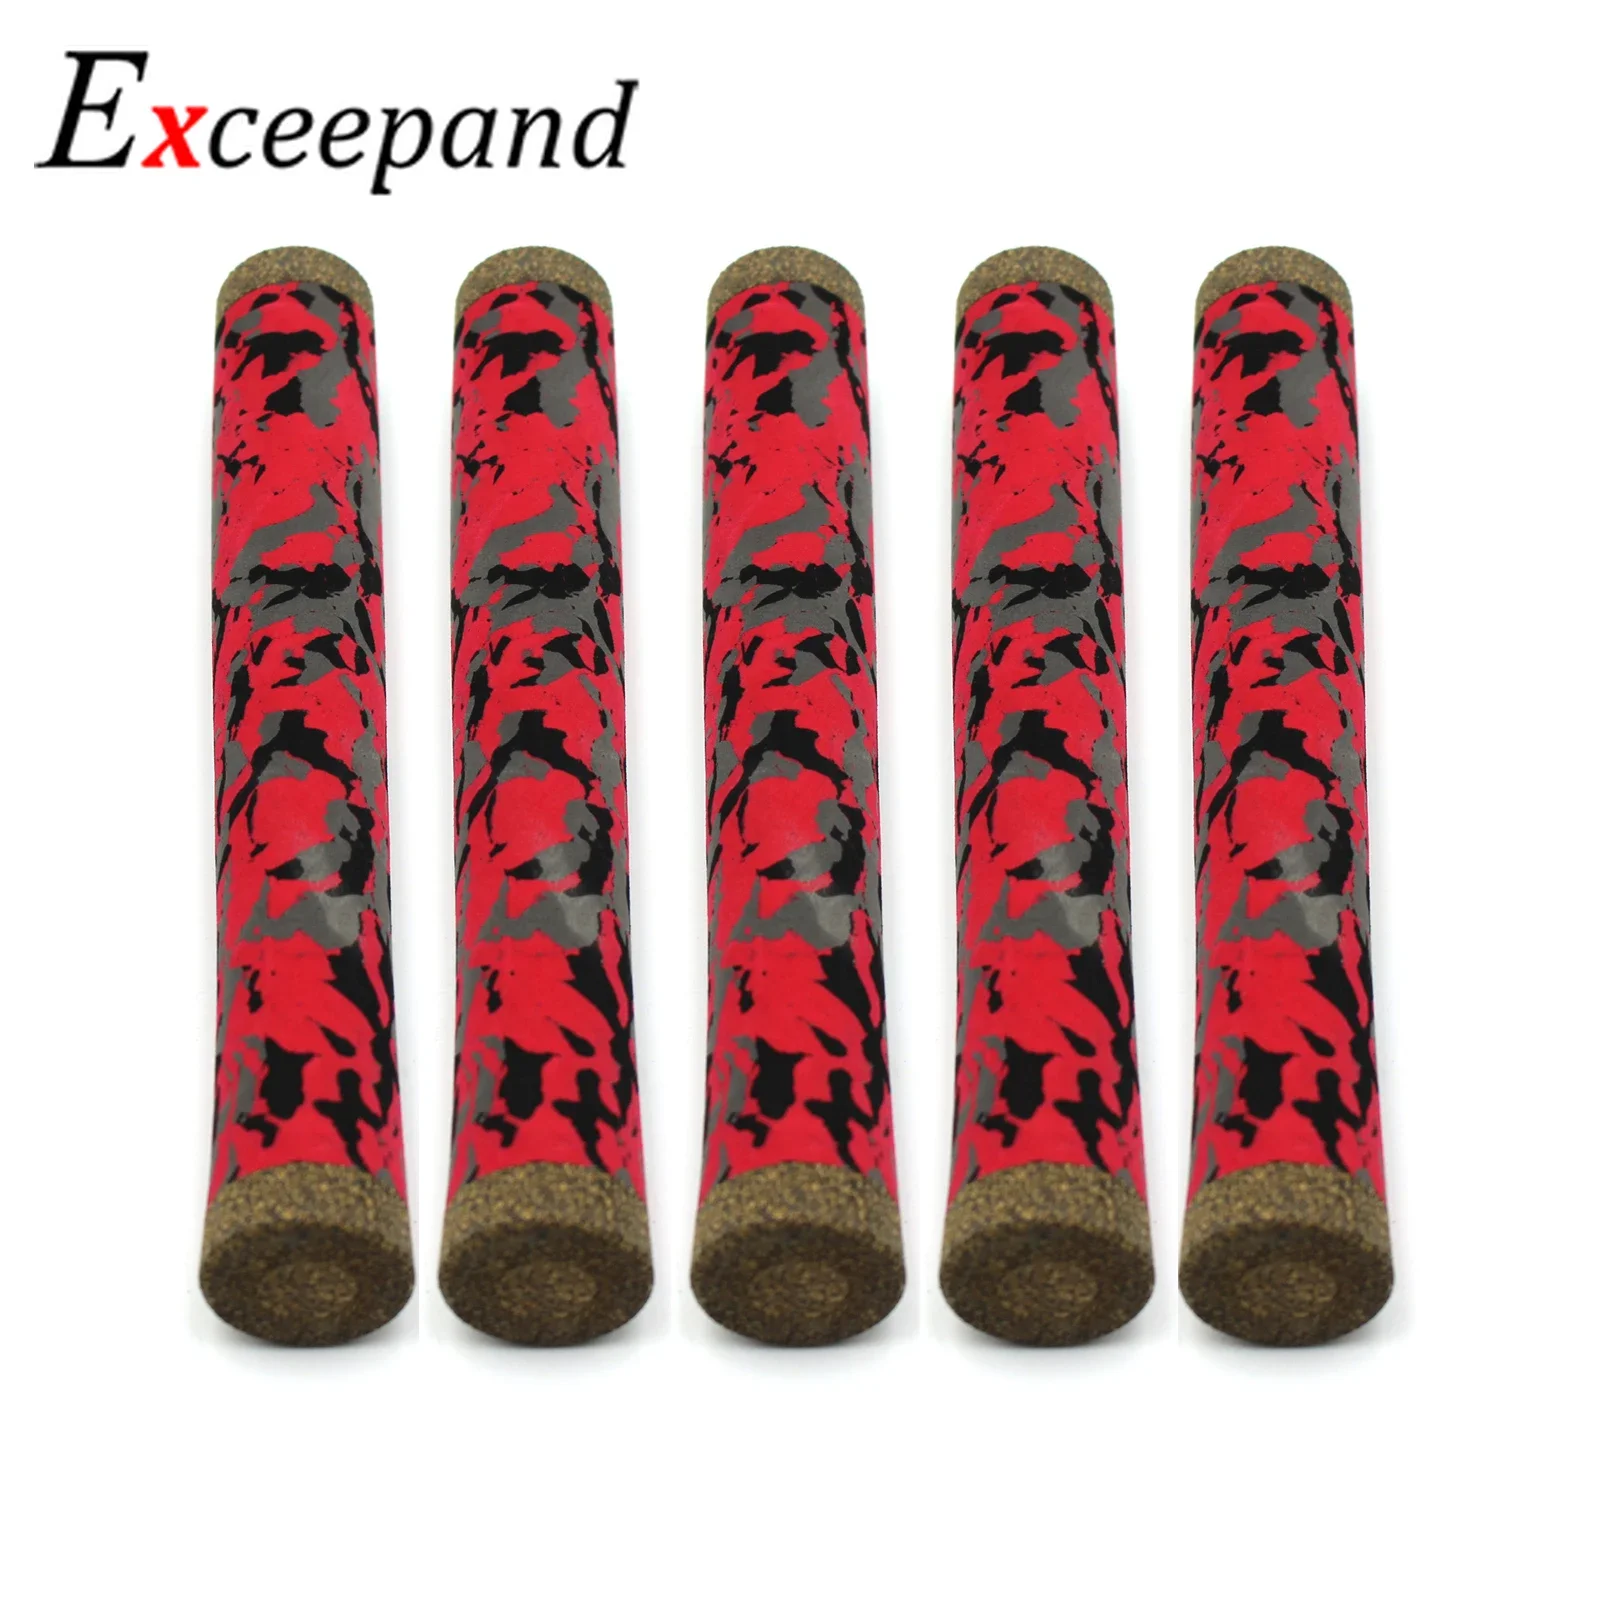 Exceepand 5 PCs 195mm Spinning EVA Rod Handle Grip Camouflage Handle  Fishing Rod Building Repair or Replacement Ultralight Rod